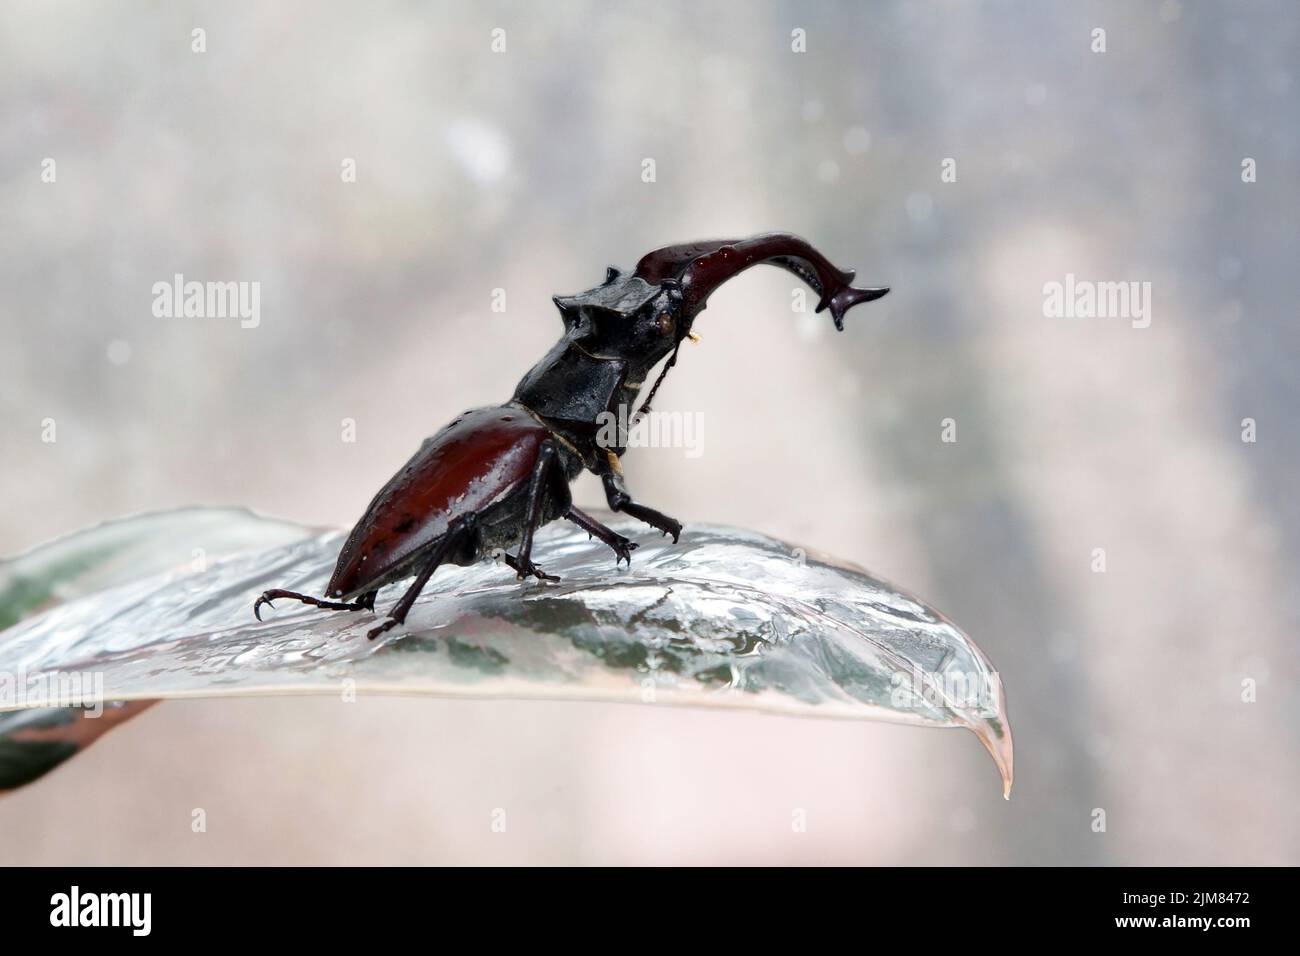 Stag beetle on the leaf Stock Photo